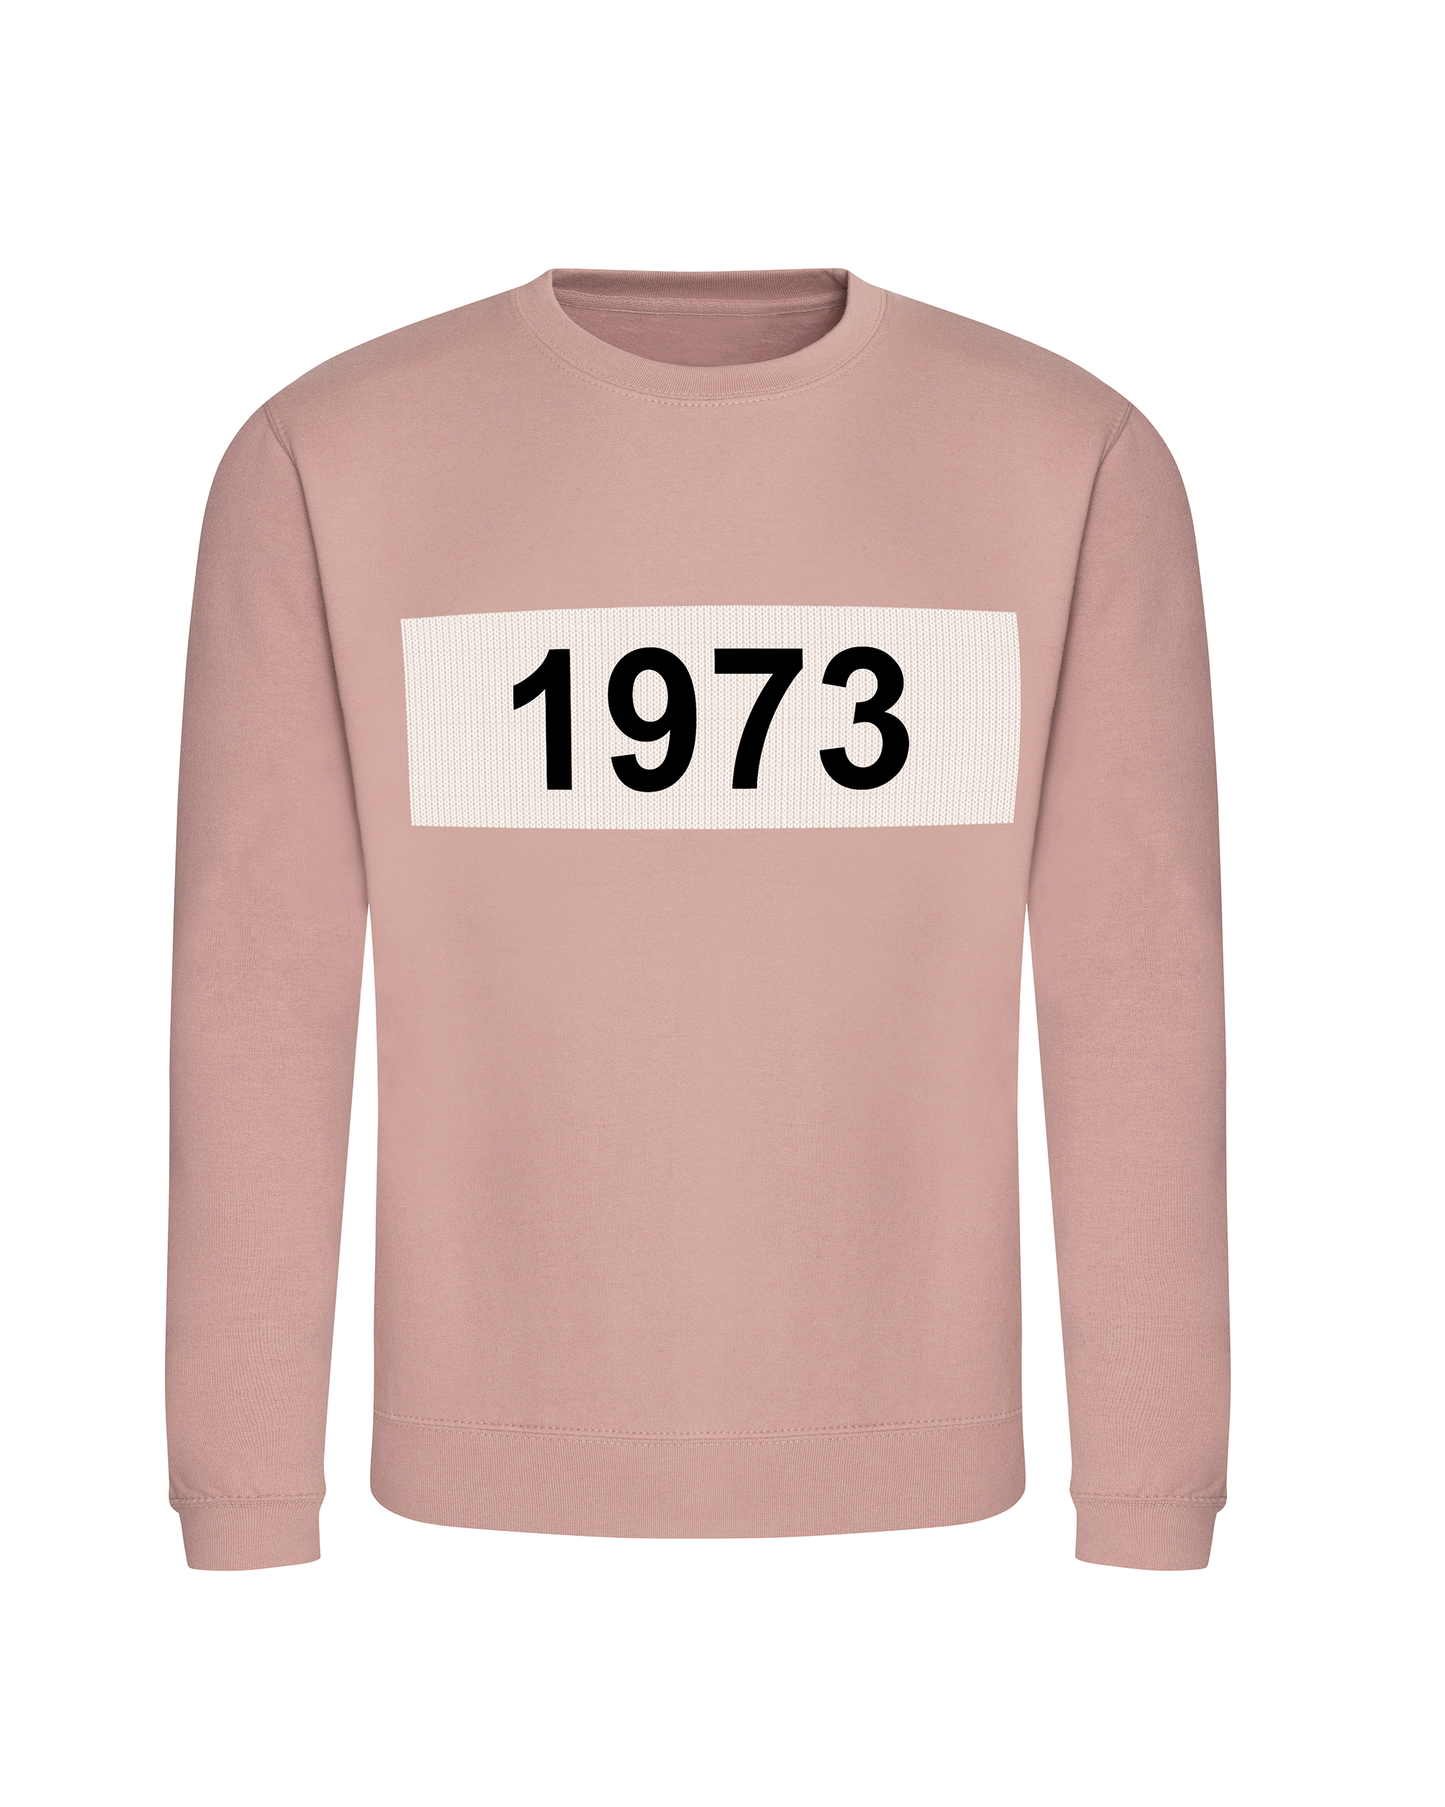 Personalised Year Sweater - Standard Fit